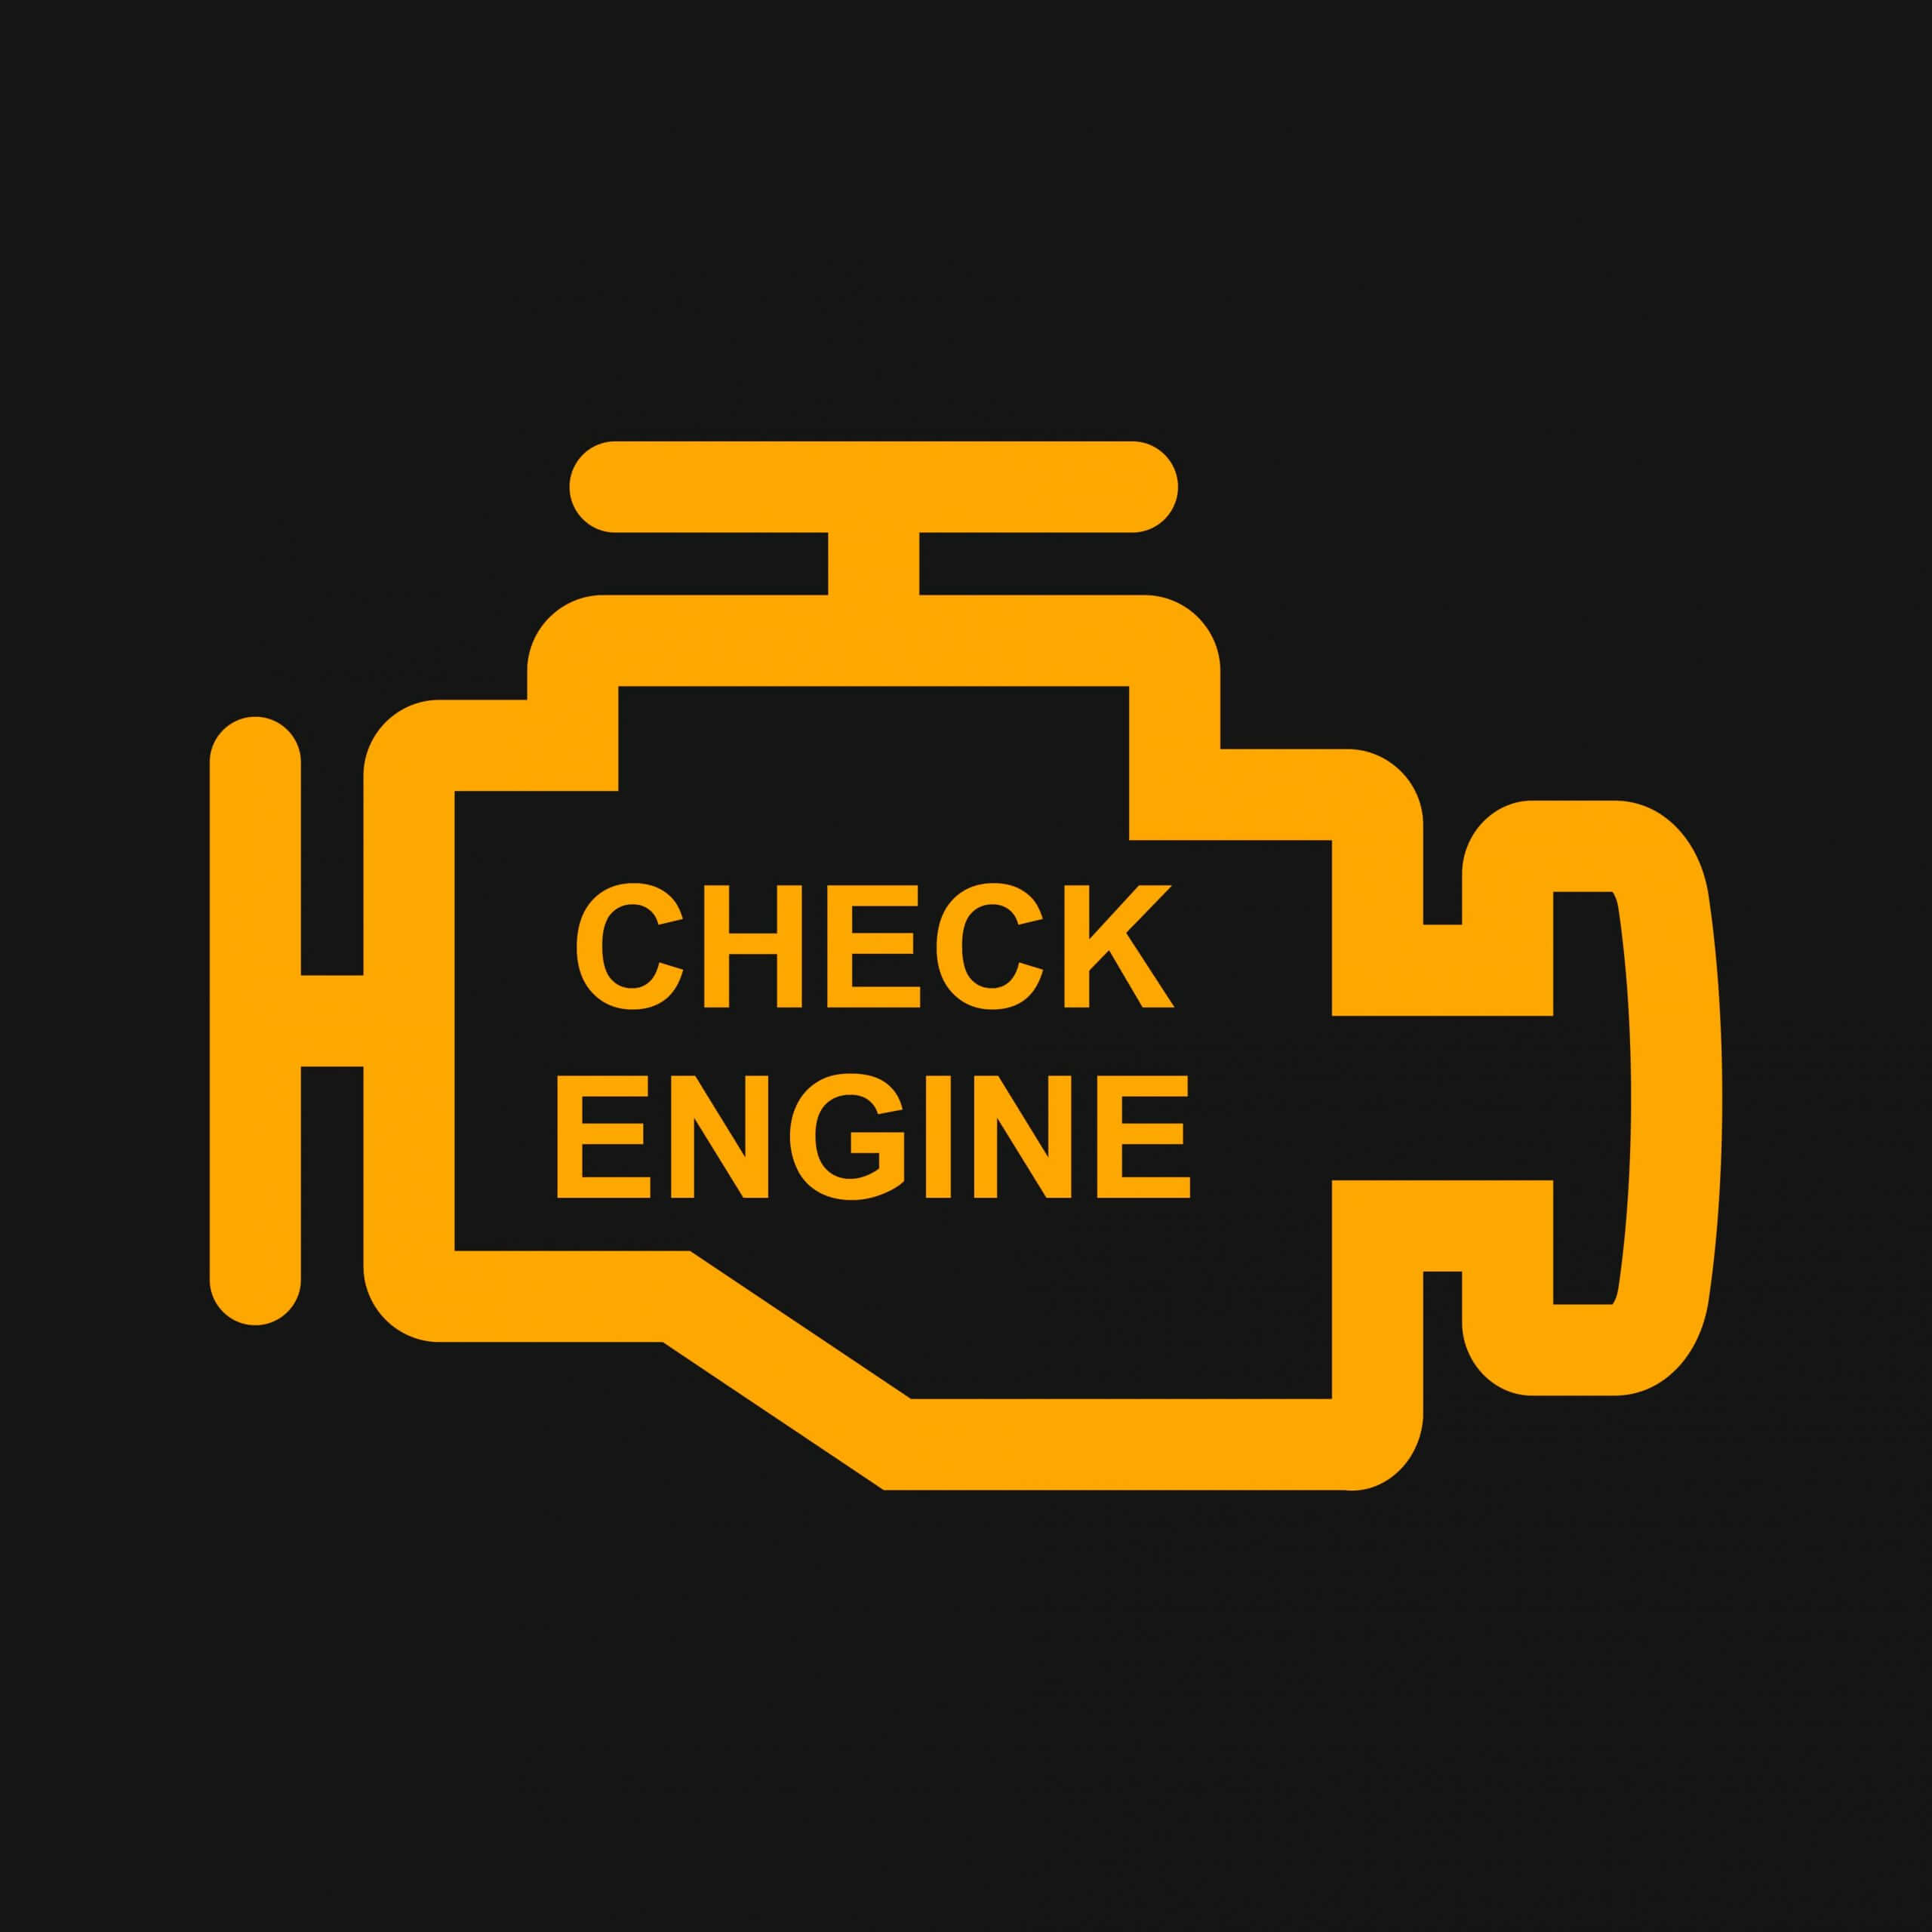 Check engine warning sign isolated in black background. Engine repair vector illustration